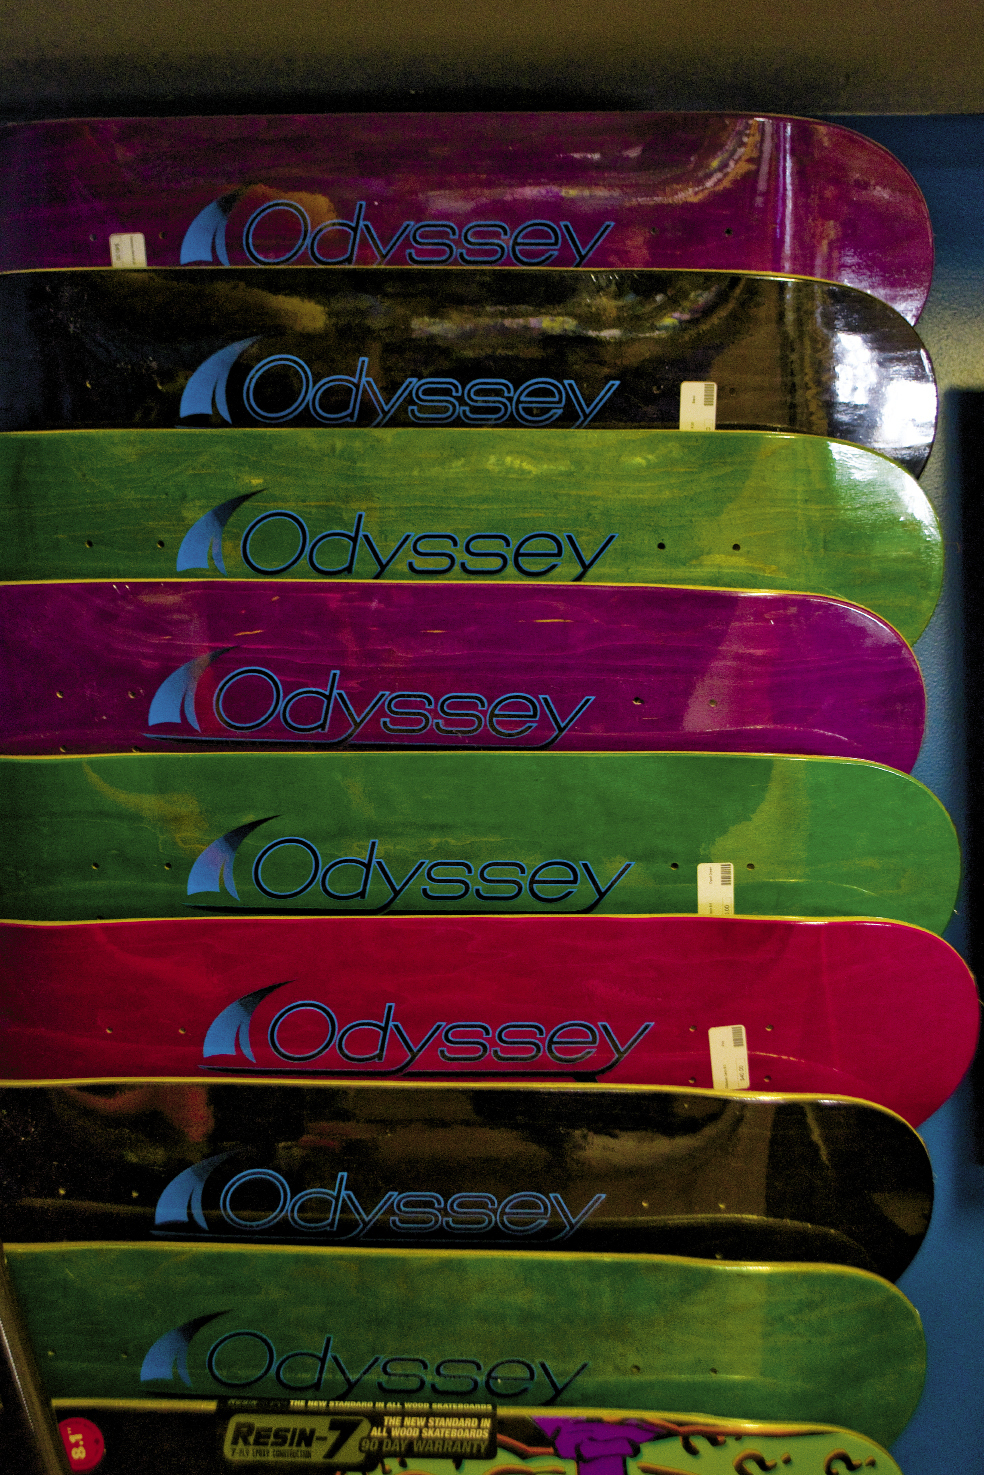 Hang Time “I hang out, skate, or maybe rent a paddleboard at Odyssey Board Shop.” odysseyboardshop.com